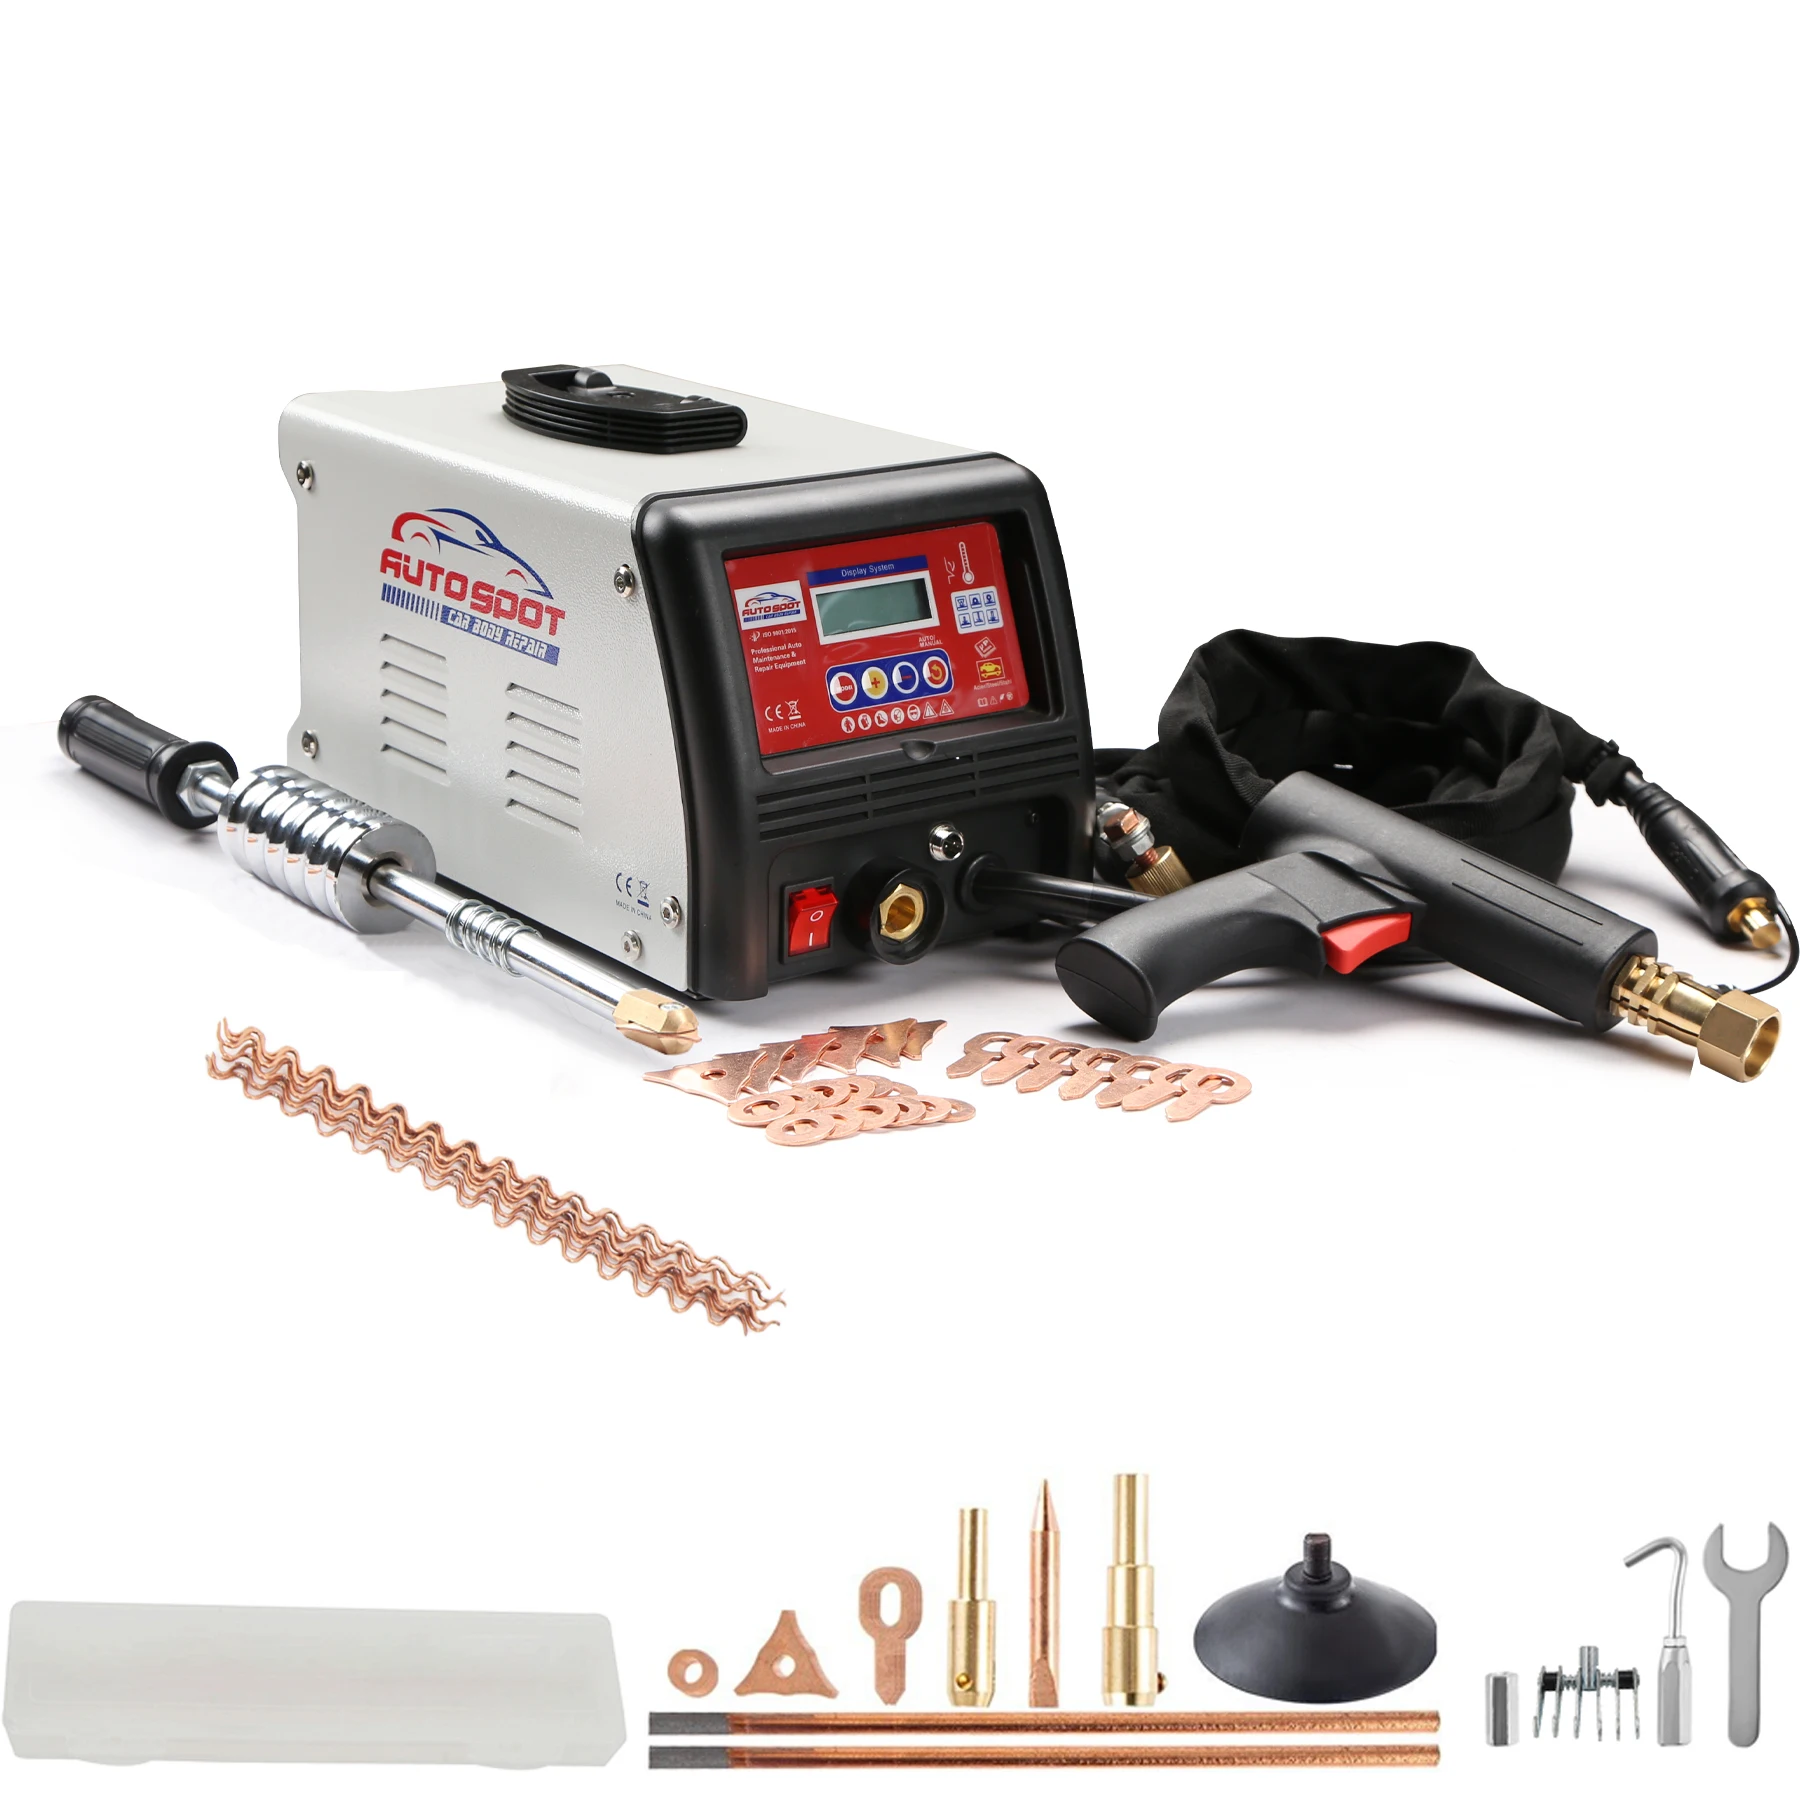 110V/220V/380V 3500A 3KW F98ES Panel Spot Welding Machine Puller, Vehicle Dent Removal, Manual Spot Welder Tool，Metal Plates Dent Repair two jaw twin legs bearing gear puller remover hand tool removal kit